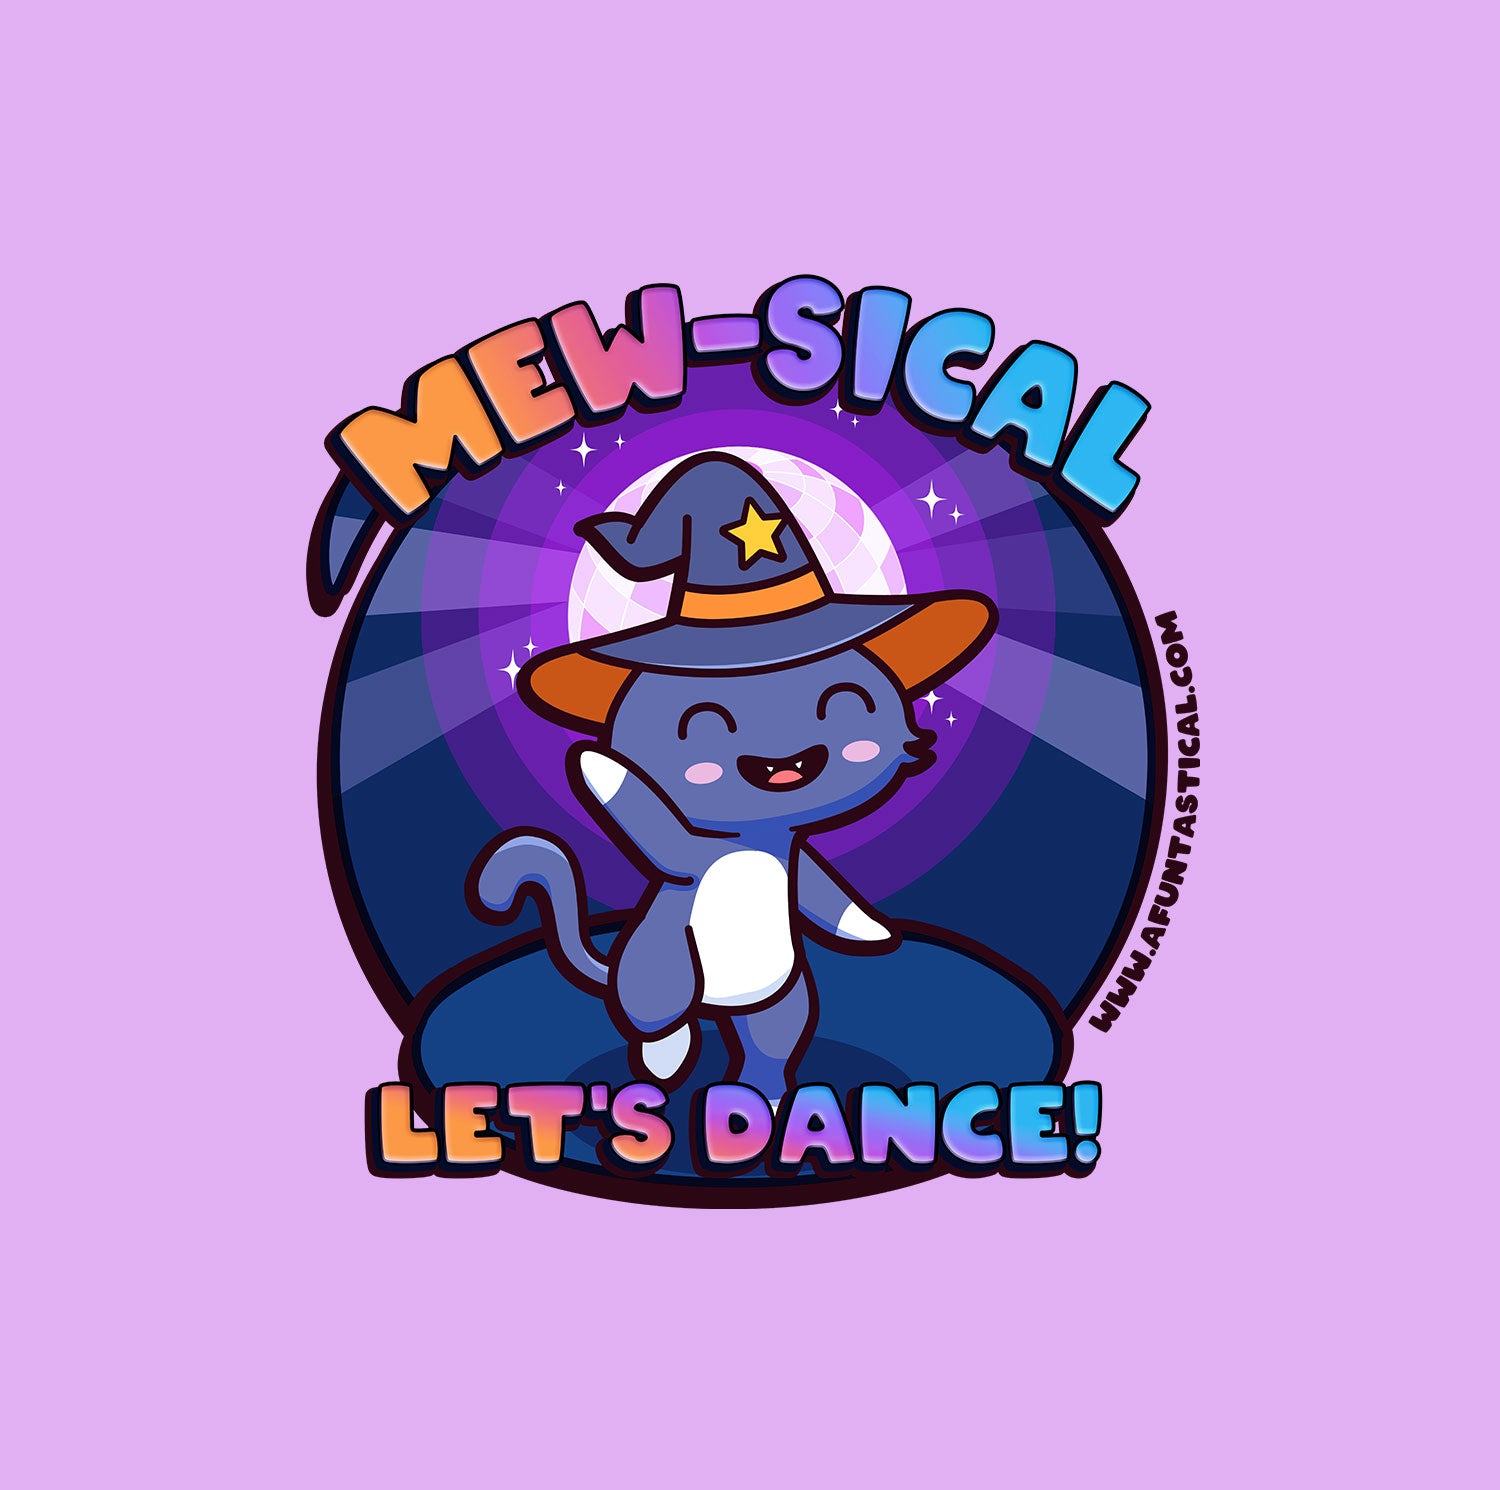 Fluffy's Mew-sical Dance Party Softstyle Tee